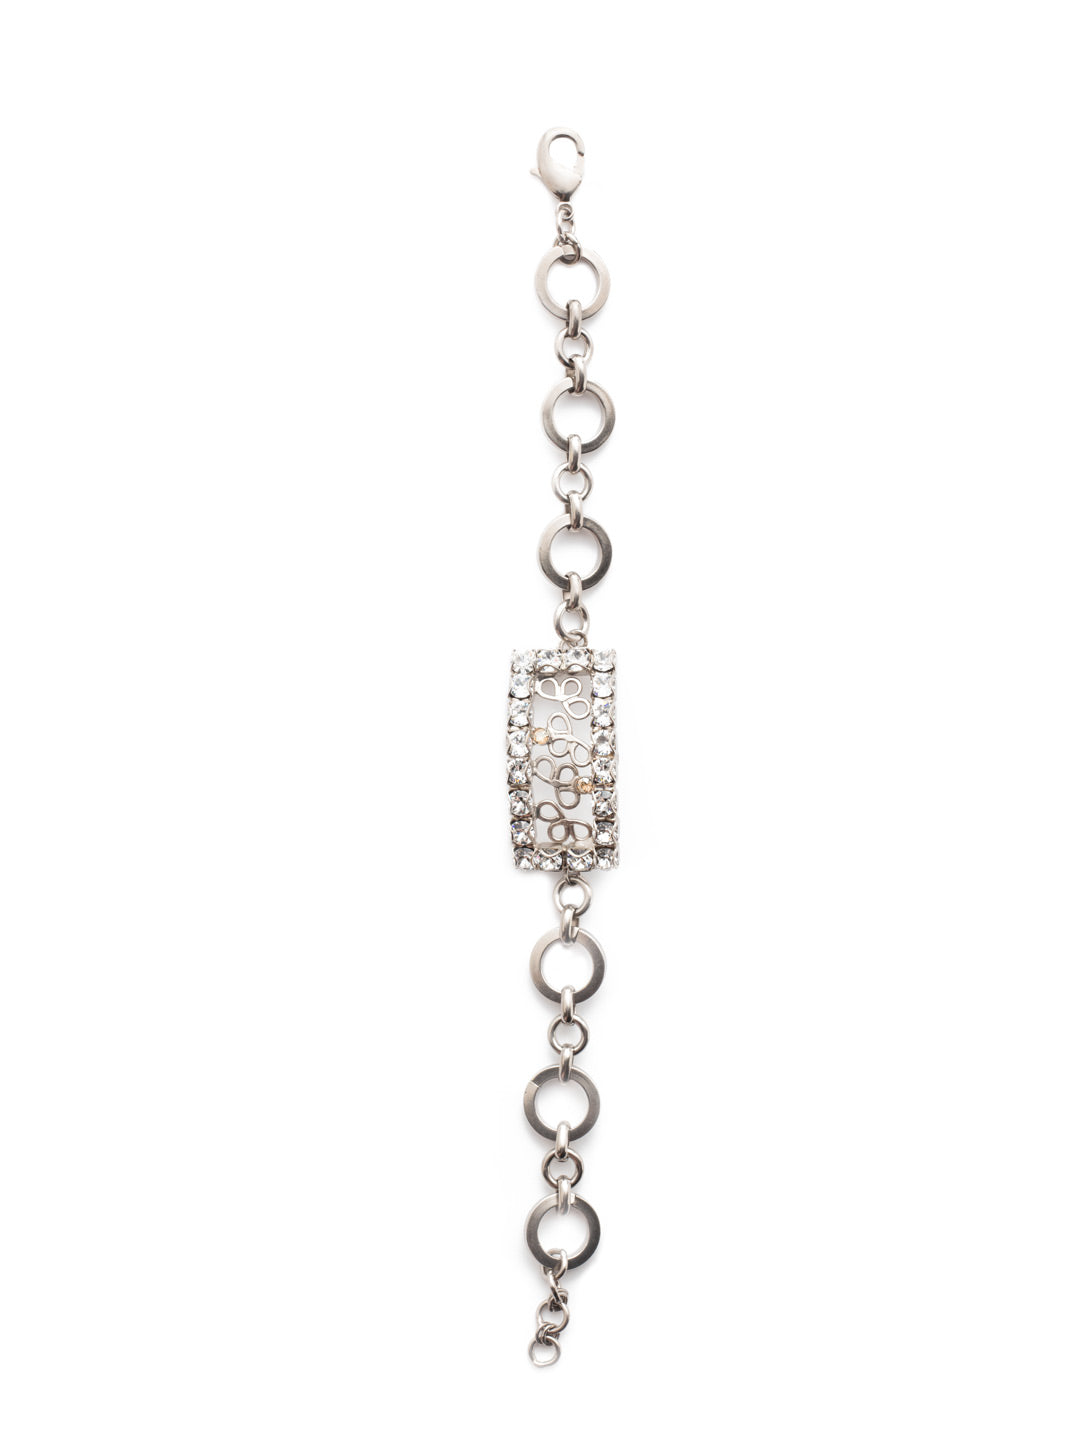 Ornella Tennis Bracelet - BES1ASGNS - Wear the Ornella Tennis Bracelet with everyday fashions to take them up a notch. The hand-soldered metal detail at its center is rimmed with sparkling crystals for a stand-out effect. From Sorrelli's Golden Shadow collection in our Antique Silver-tone finish.